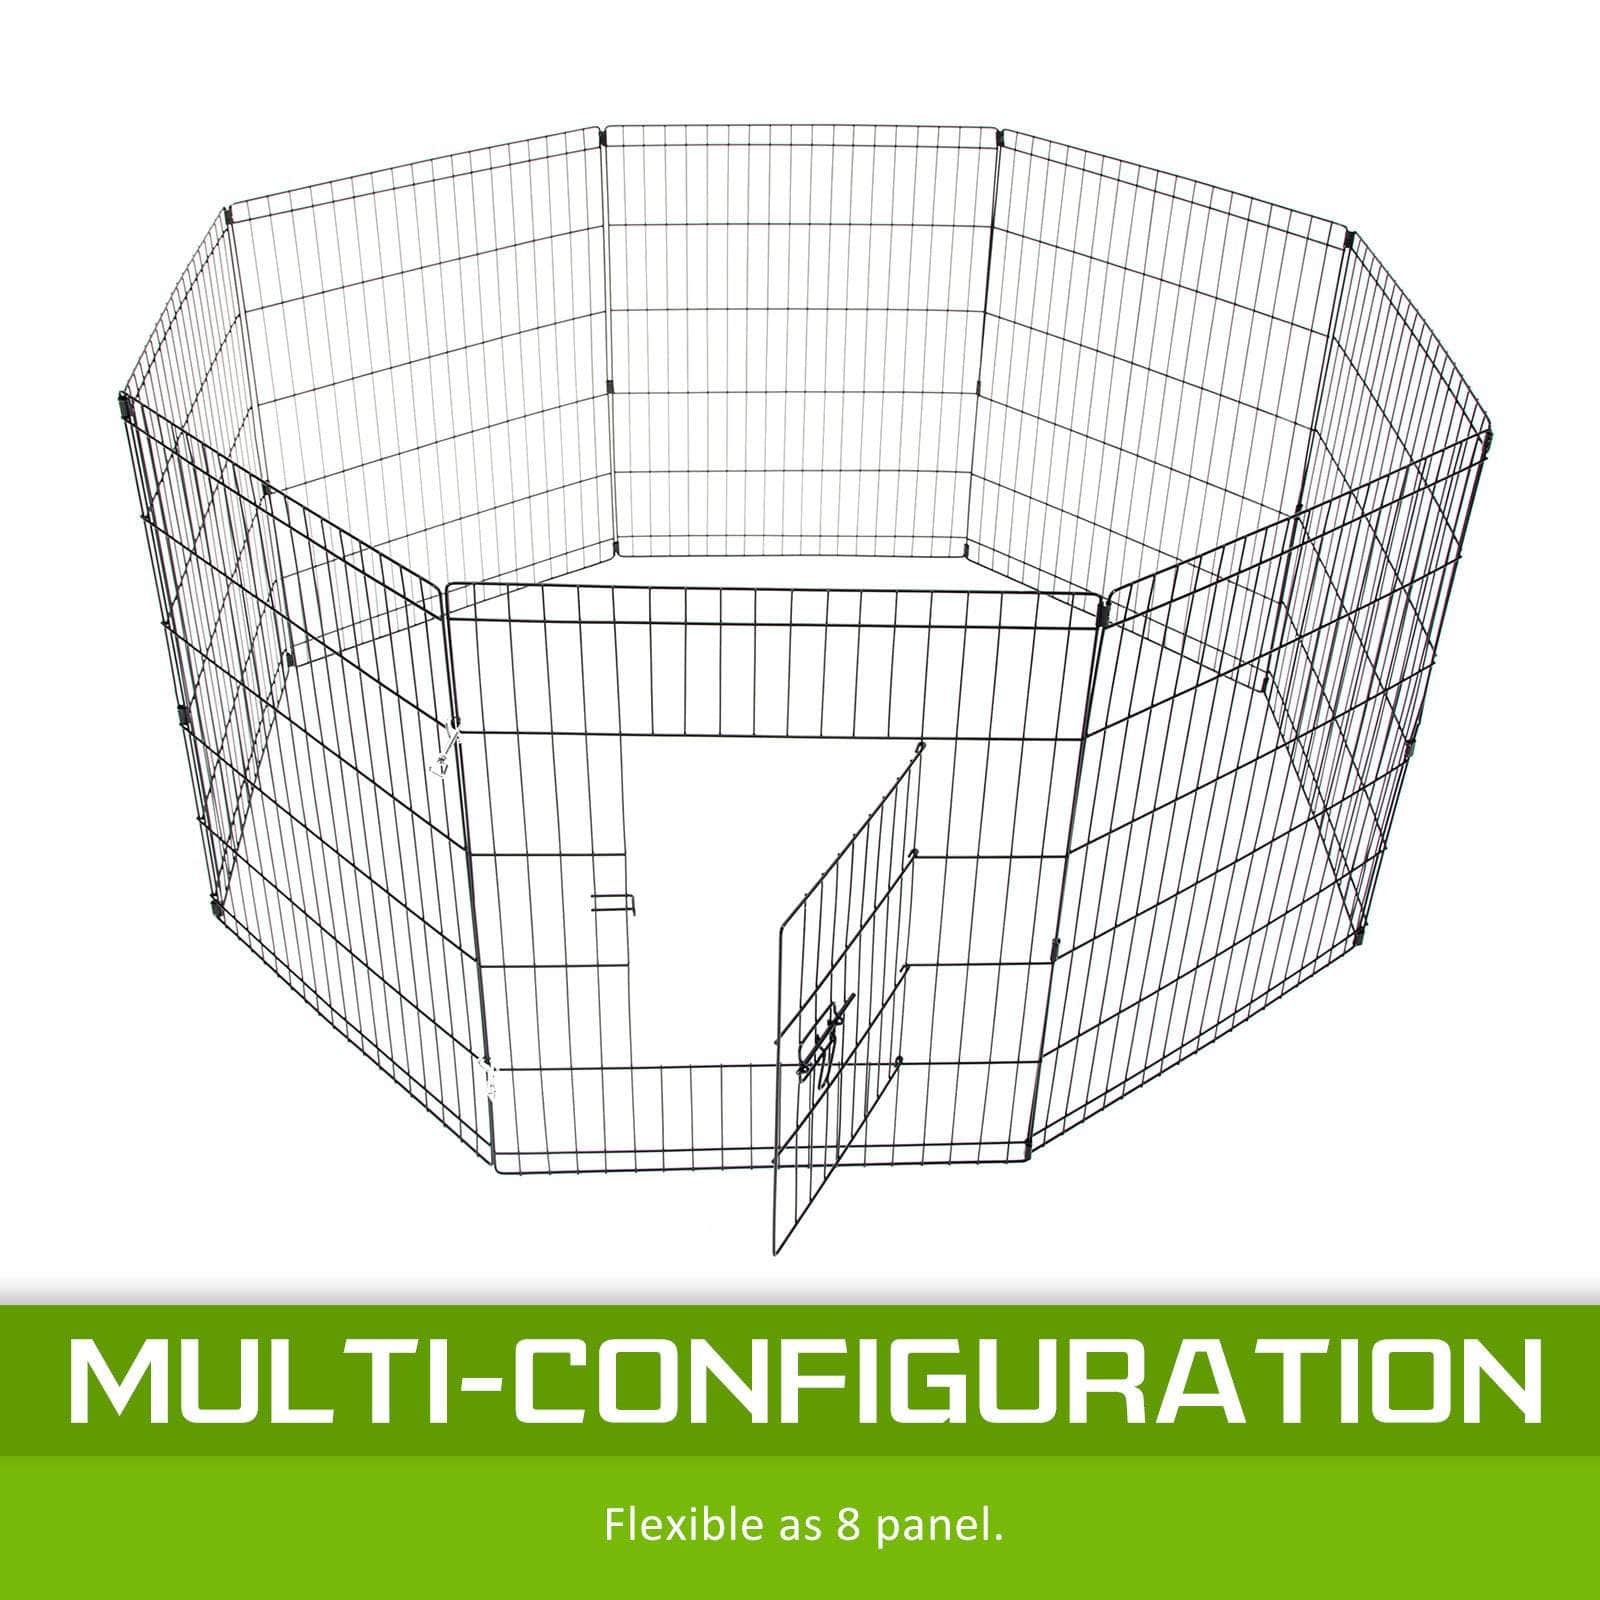 Pet Playpen 8 Panel 36In Foldable Dog Exercise Enclosure Fence Cage